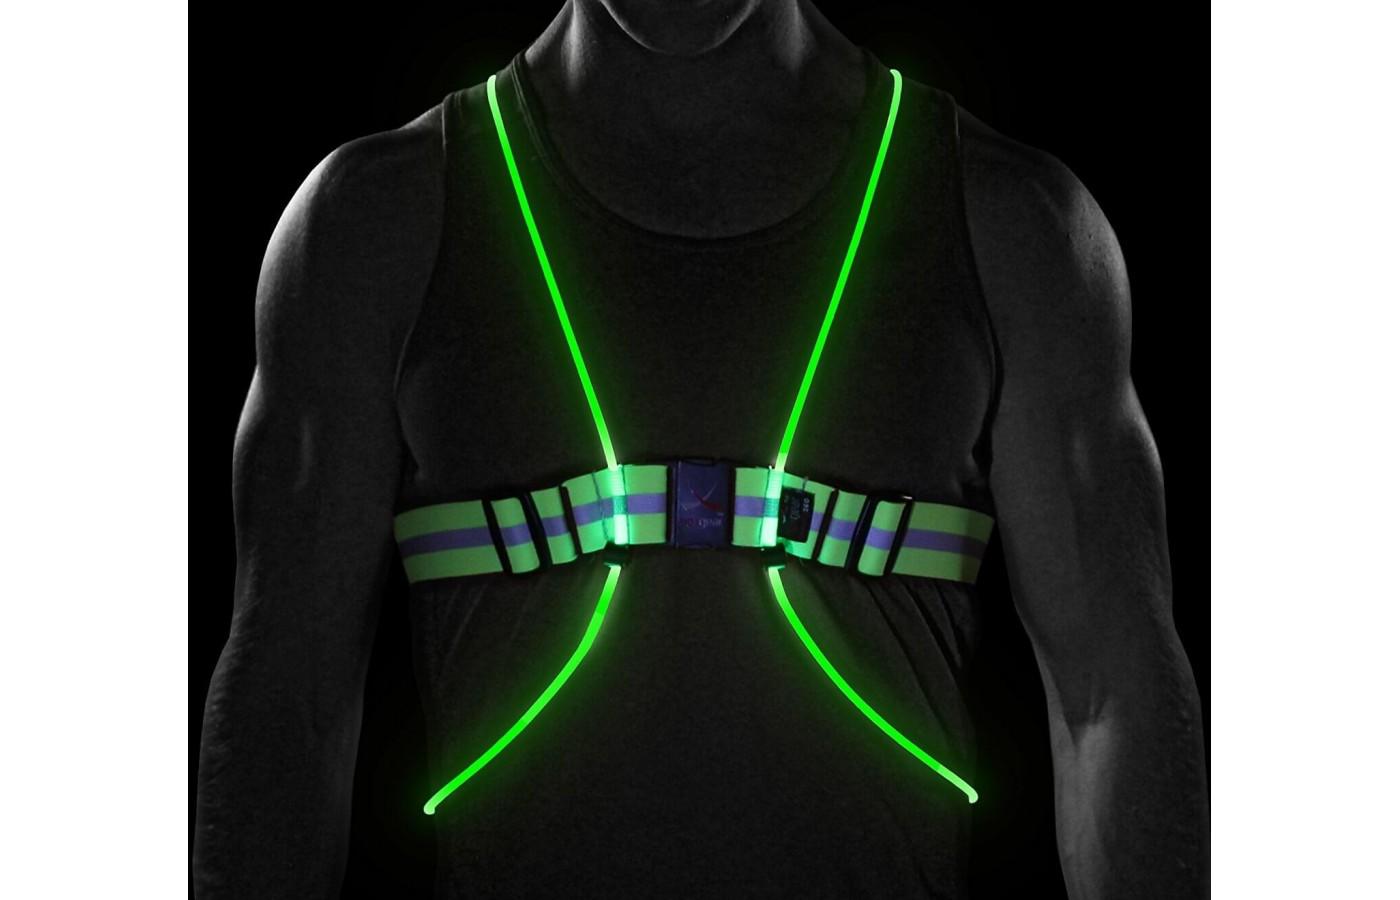 The vest is powered by 2 CREE LED bulbs that are electricity and heat free. 